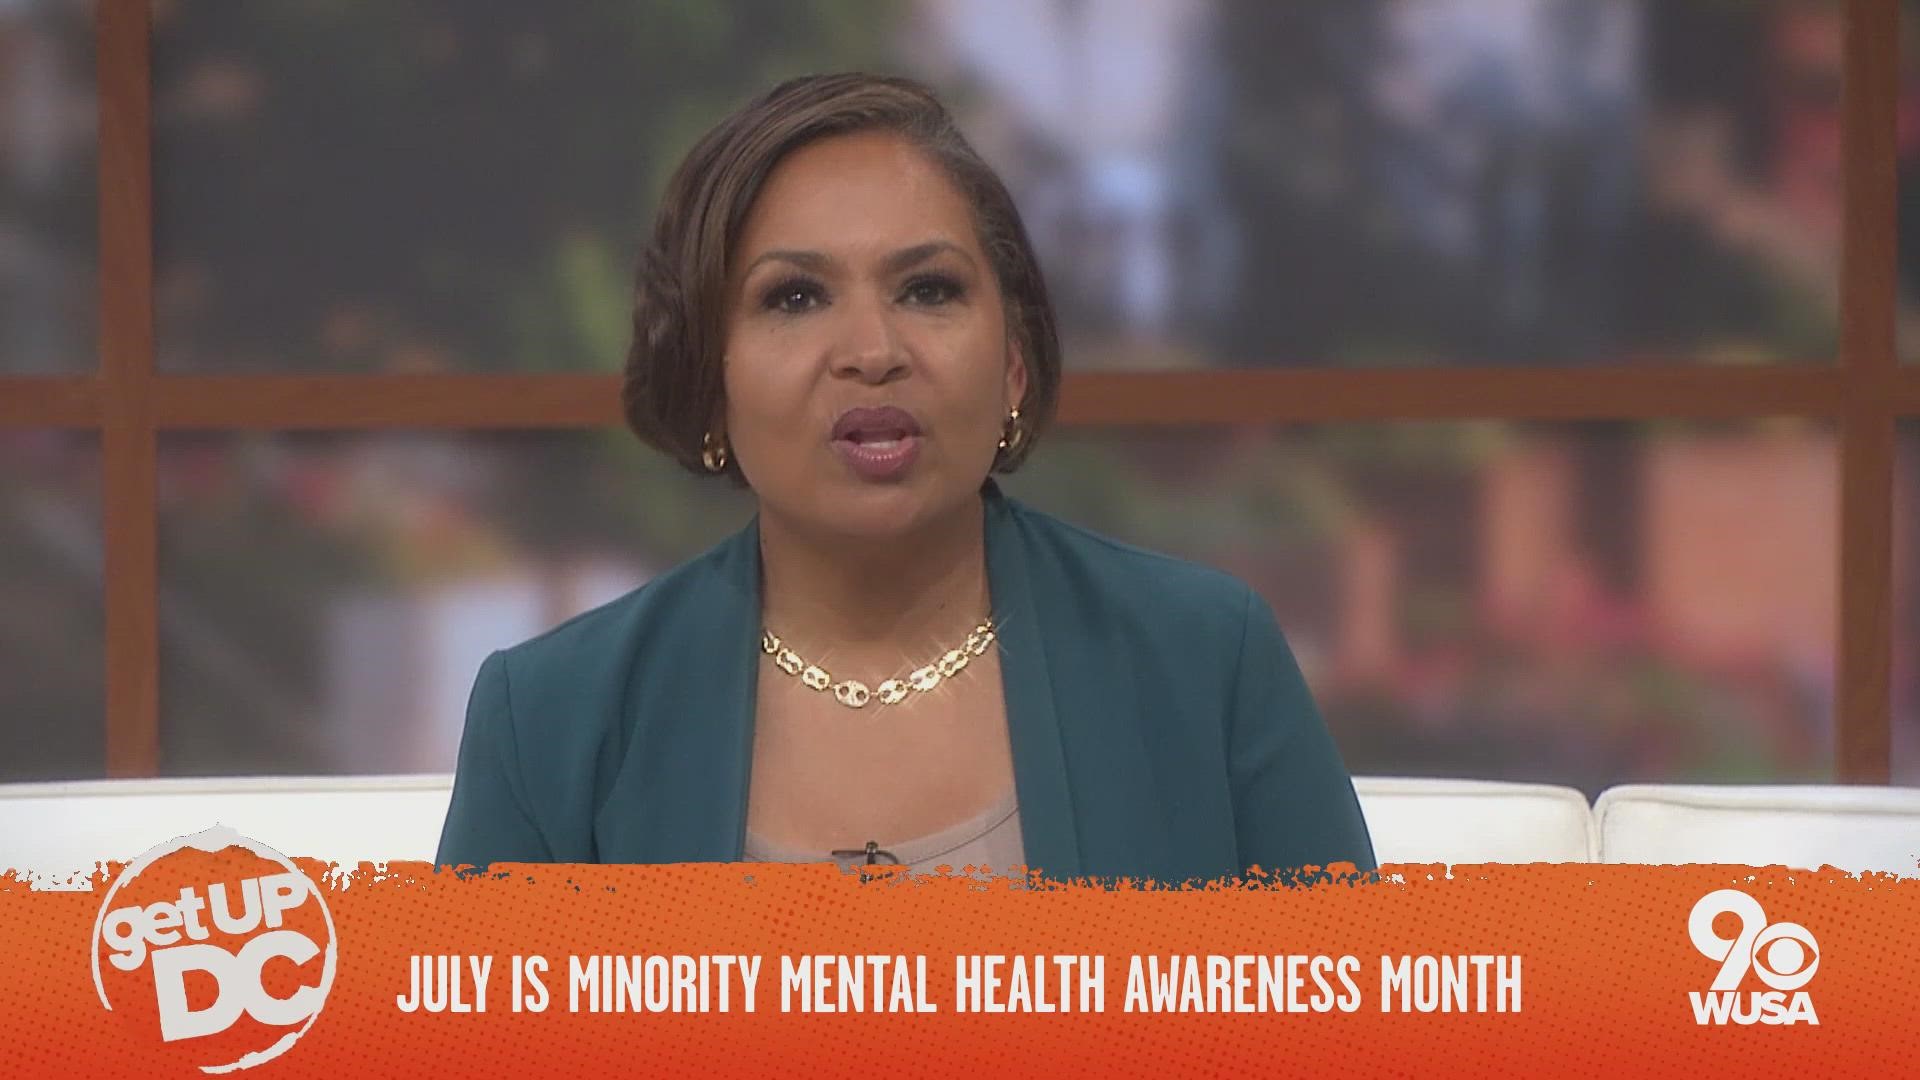 WUSA9's Allison Seymour sits down with Dr. Kali Cyrus, a licensed psychiatrist to discuss the importance of Minority Mental Health Awareness month.